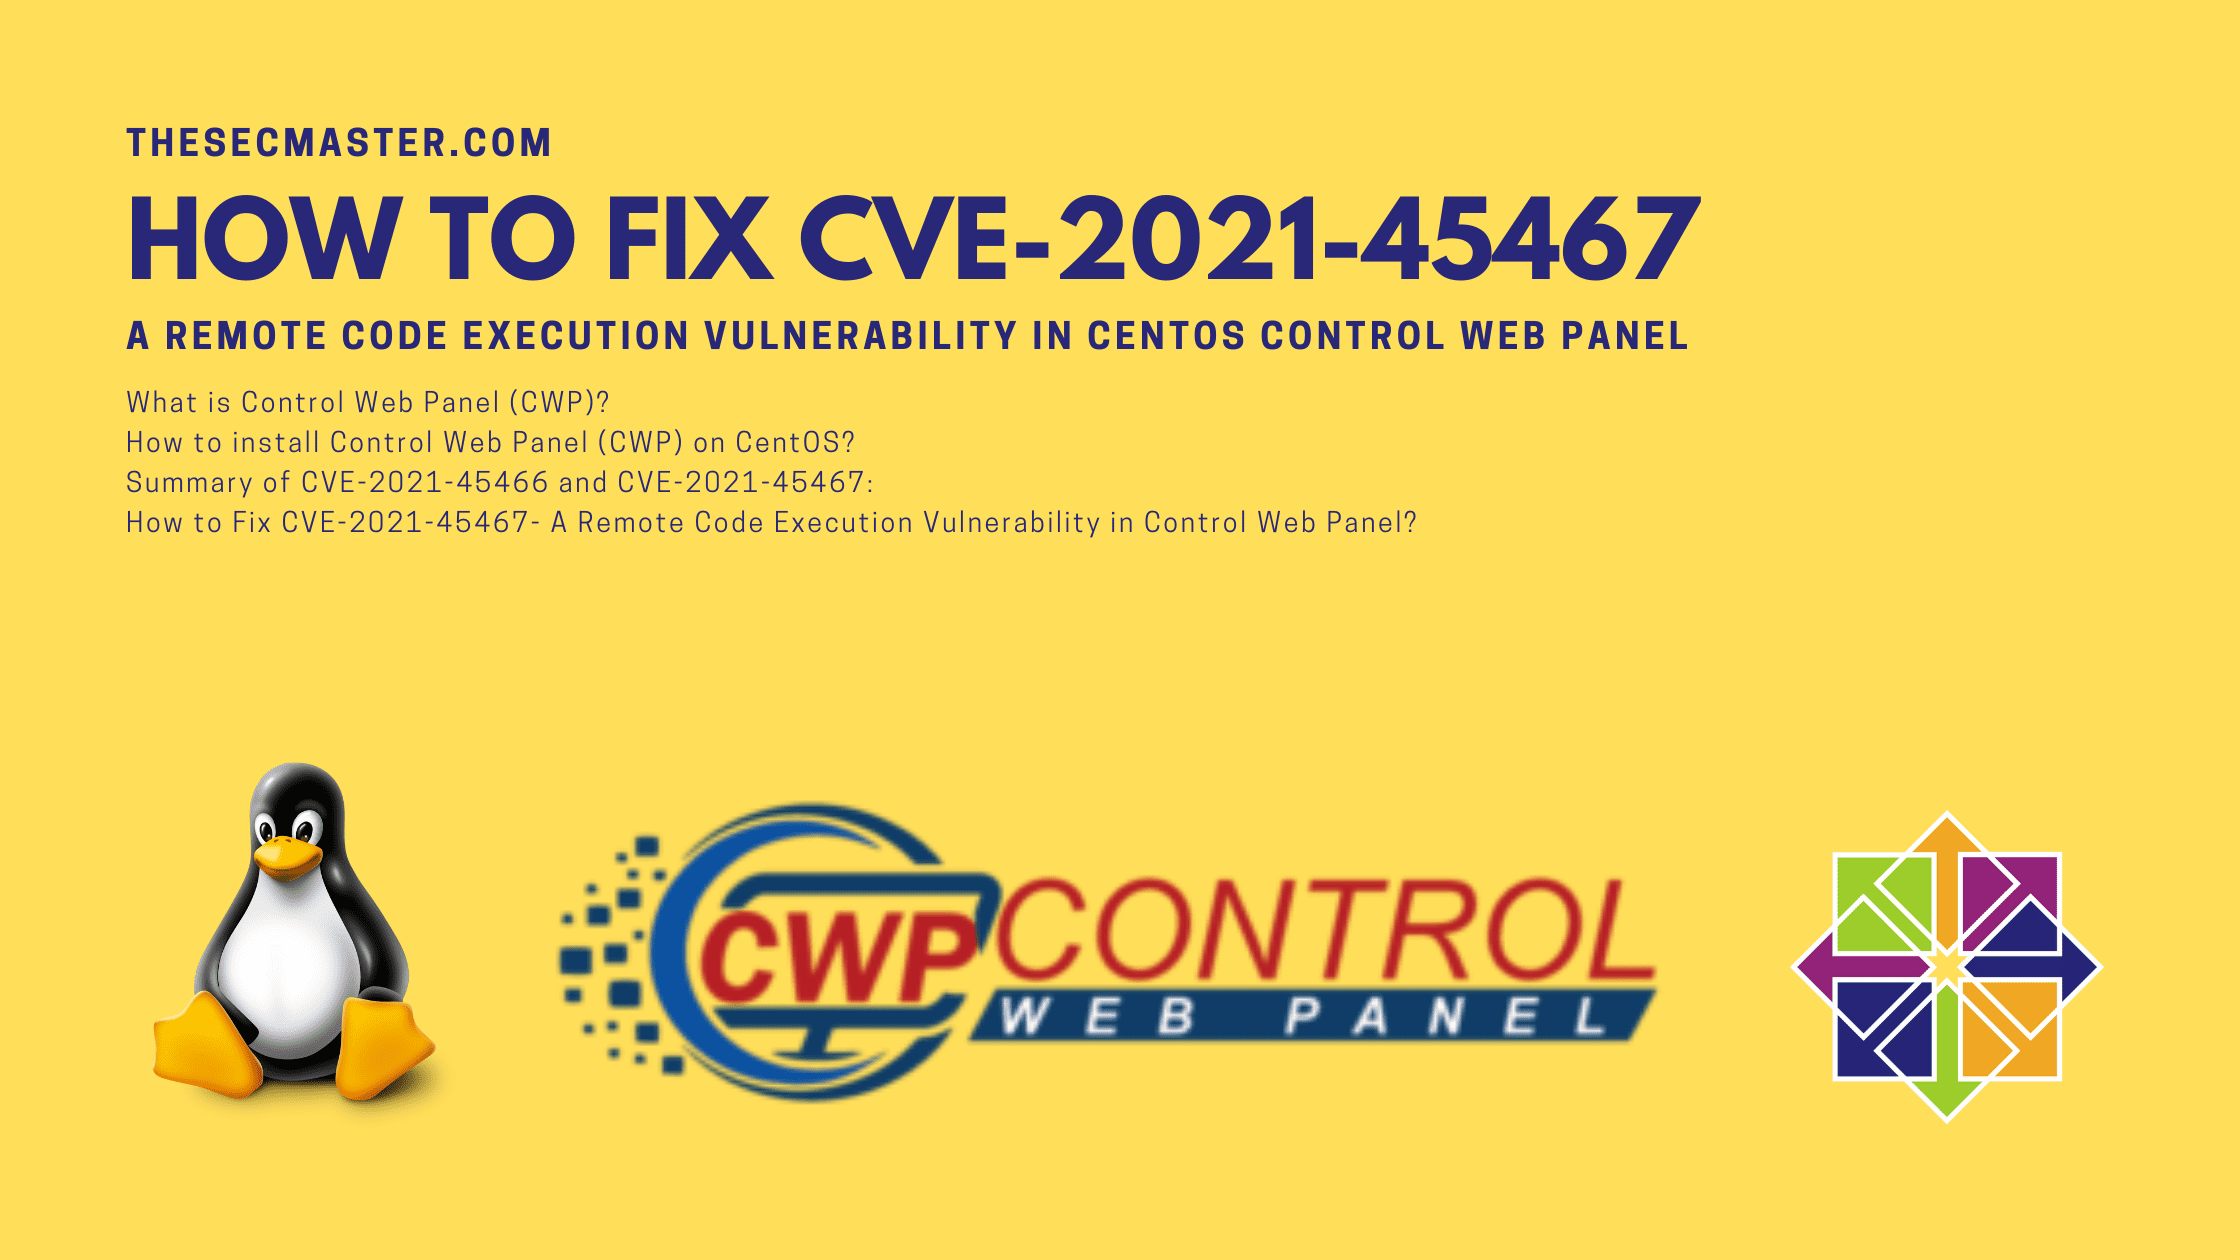 How To Fix Cve 2021 45467 A Remote Code Execution Vulnerability In Control Web Panel